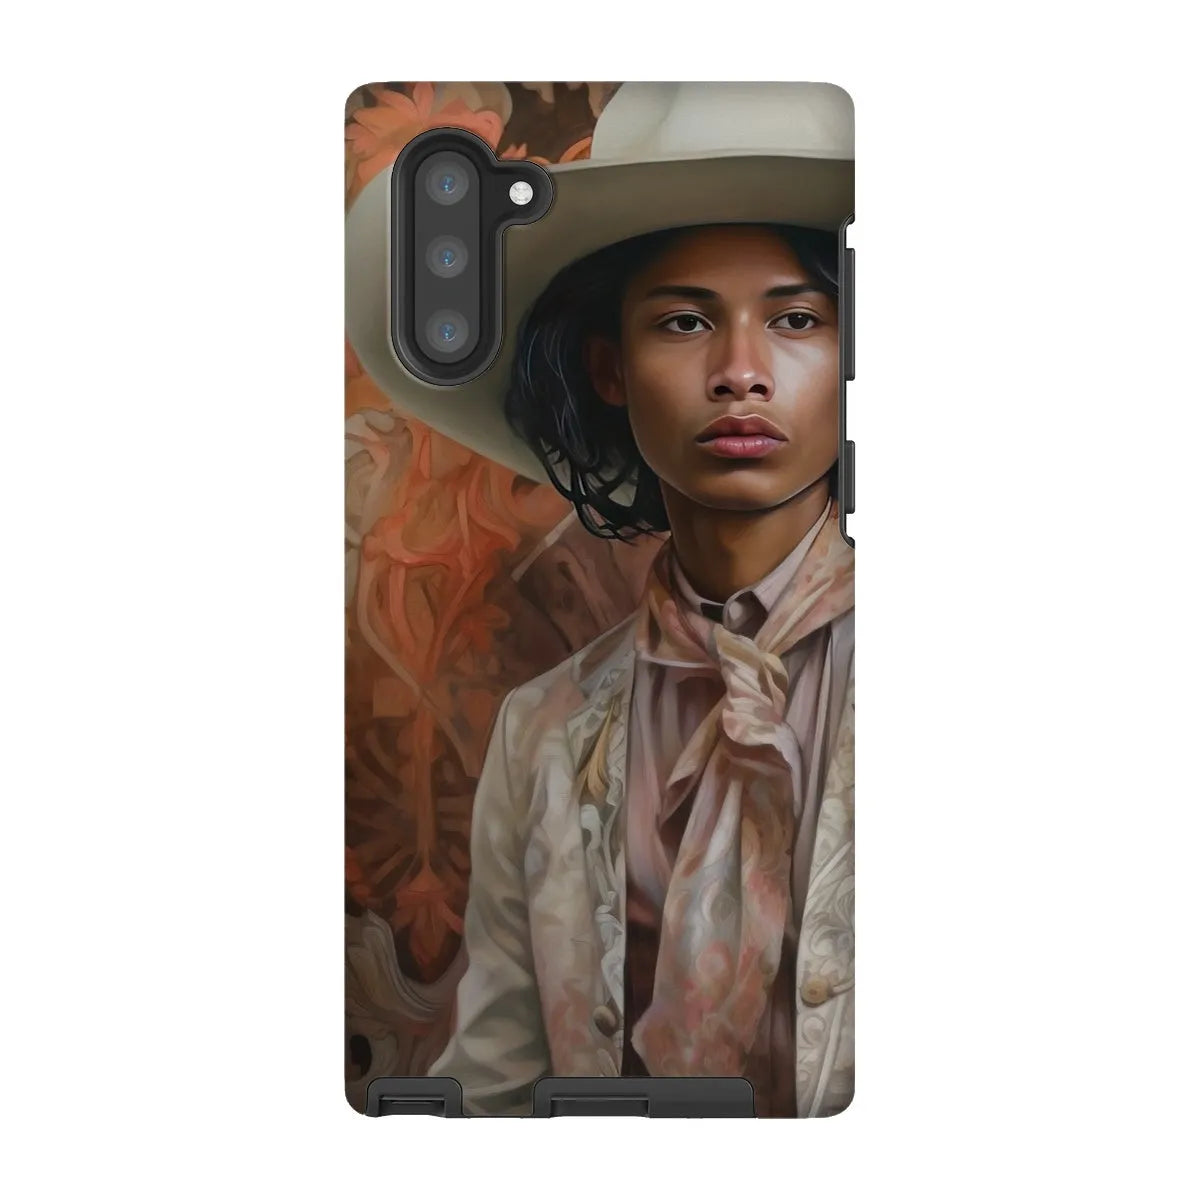 Arjuna The Gay Cowboy - Gay Aesthetic Art Phone Case - Samsung Galaxy Note 10 / Matte - Mobile Phone Cases - Aesthetic